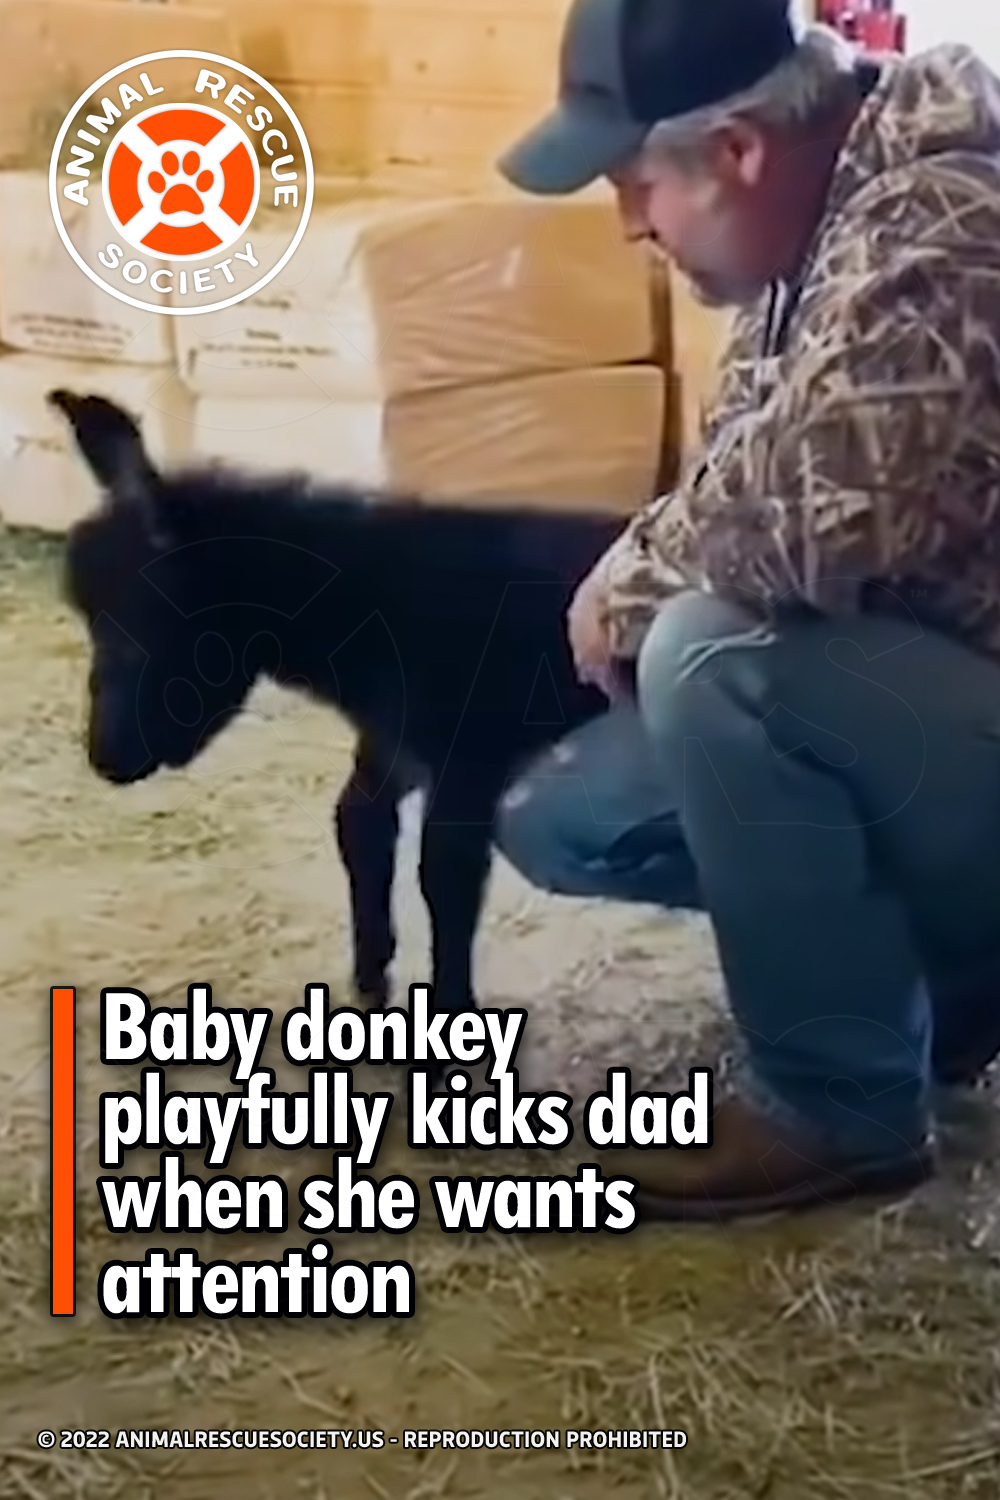 Baby donkey playfully kicks dad when she wants attention